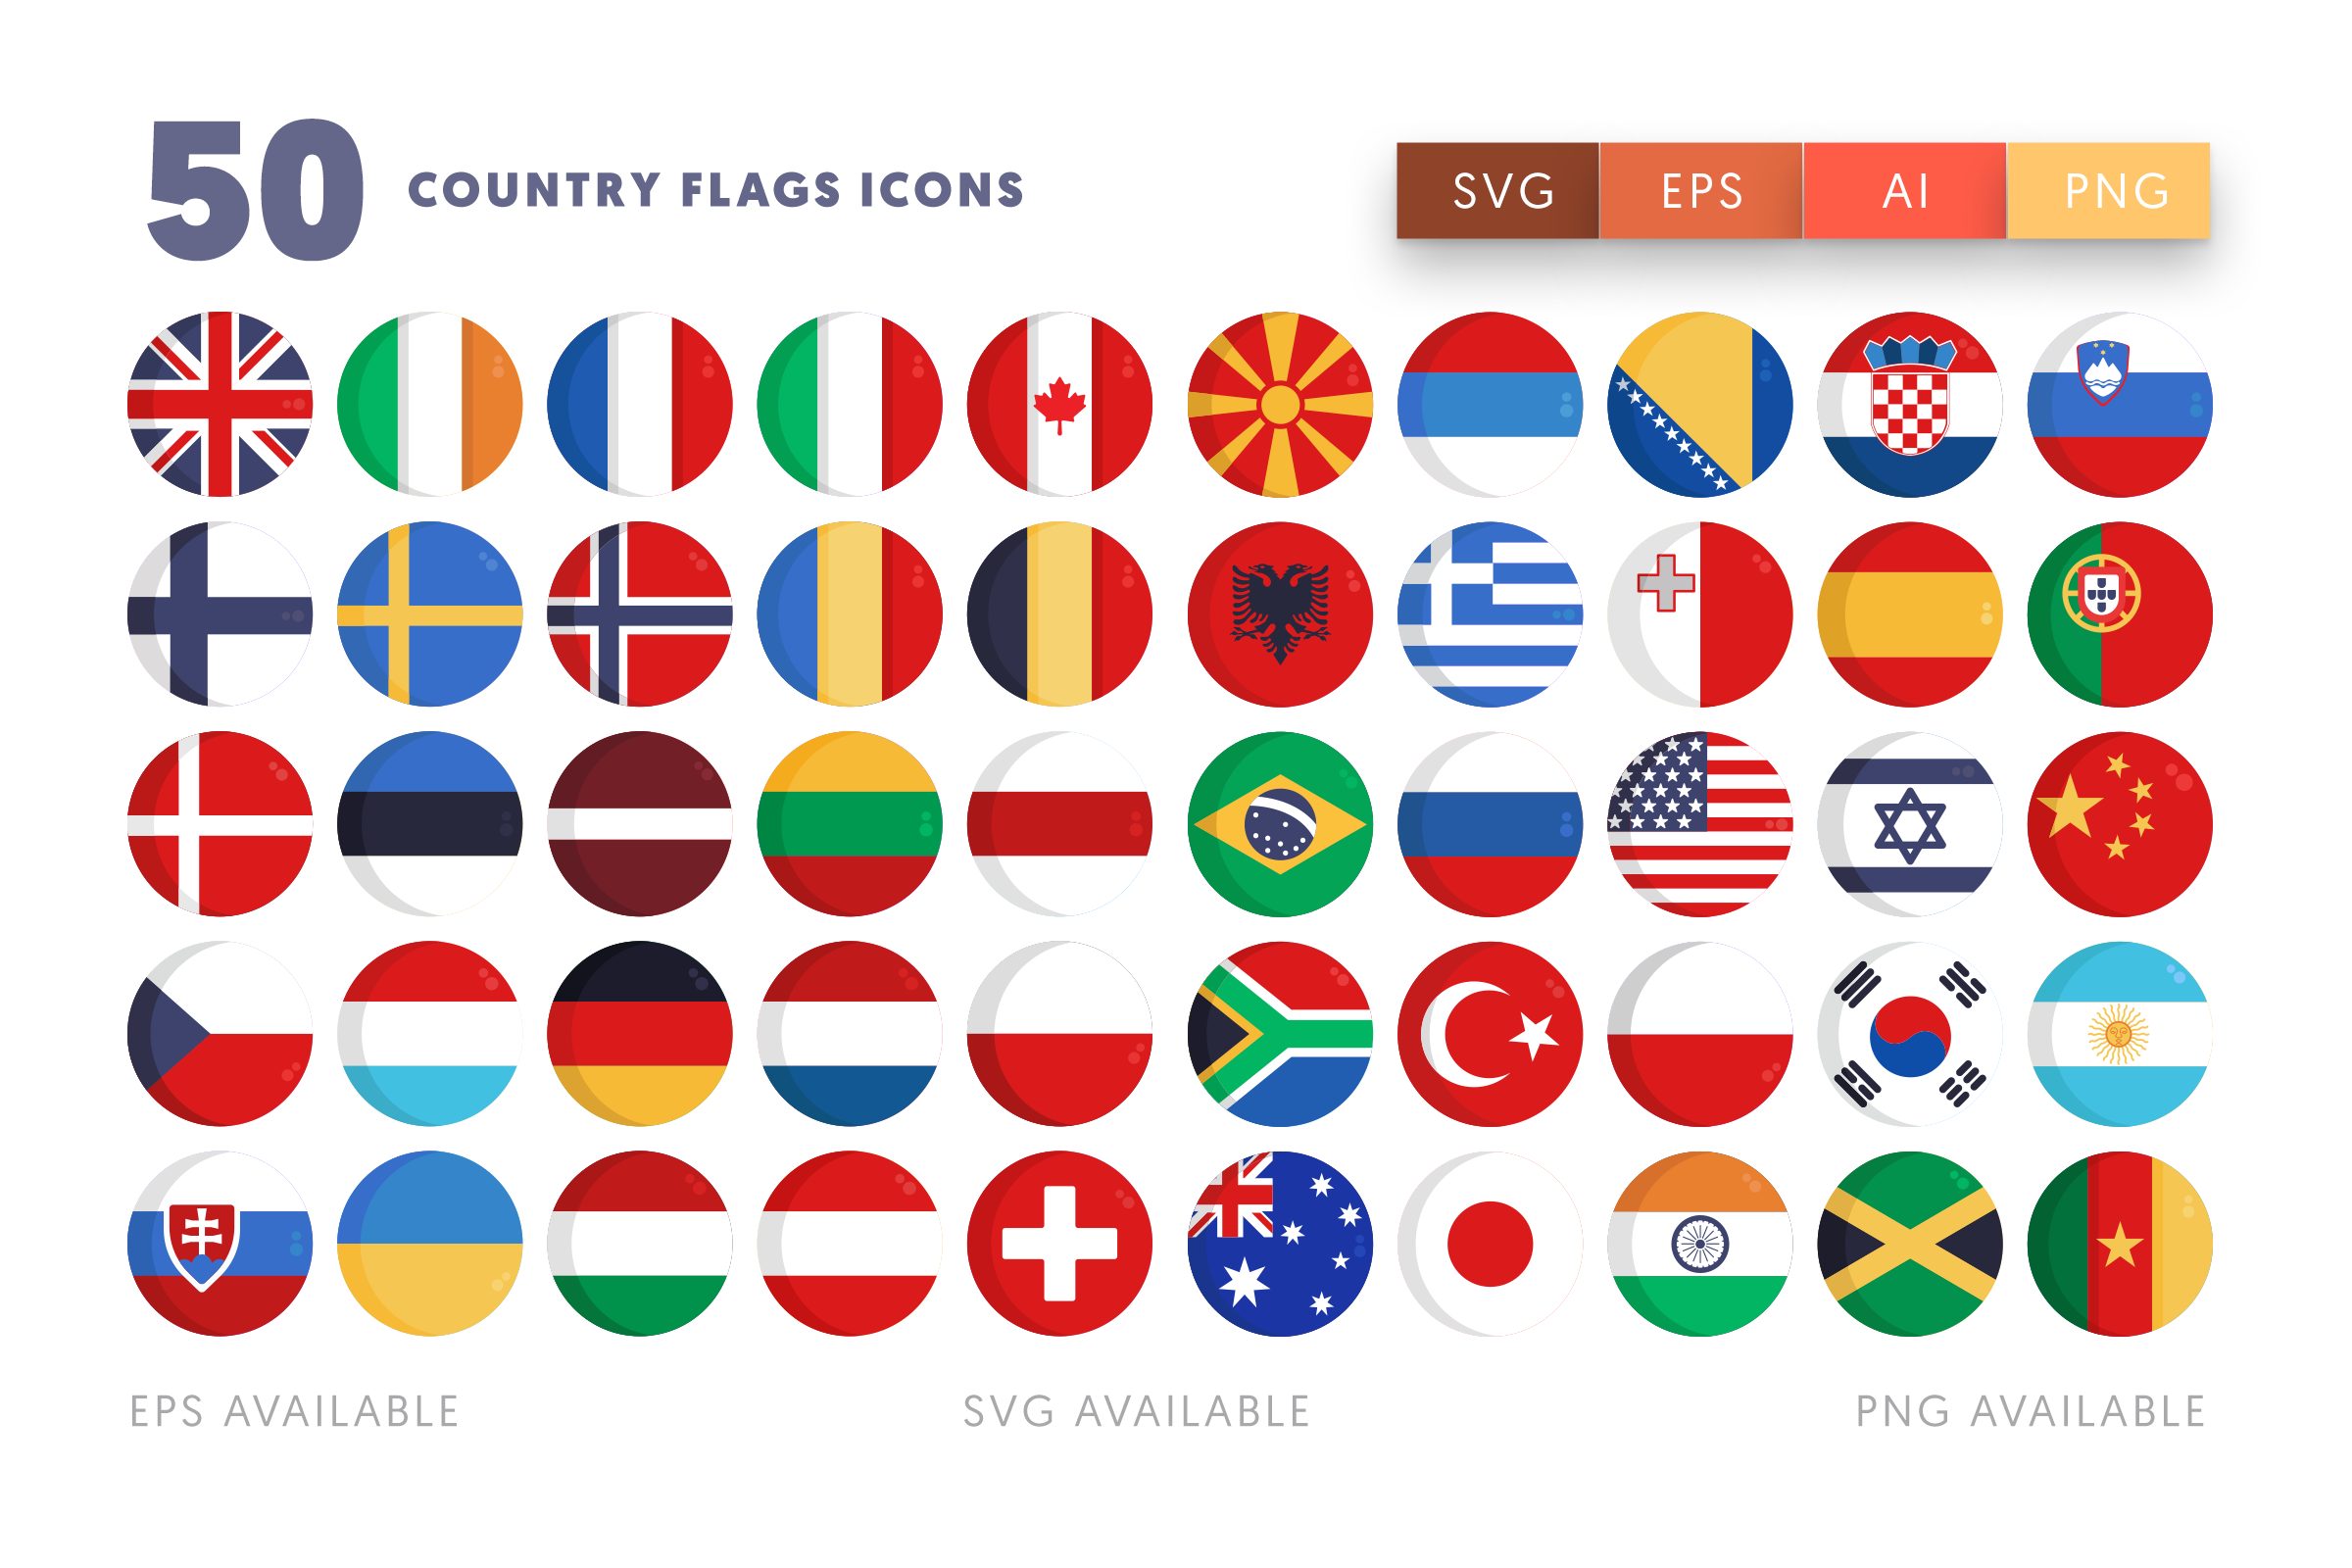 Country Flags icons png/svg/eps